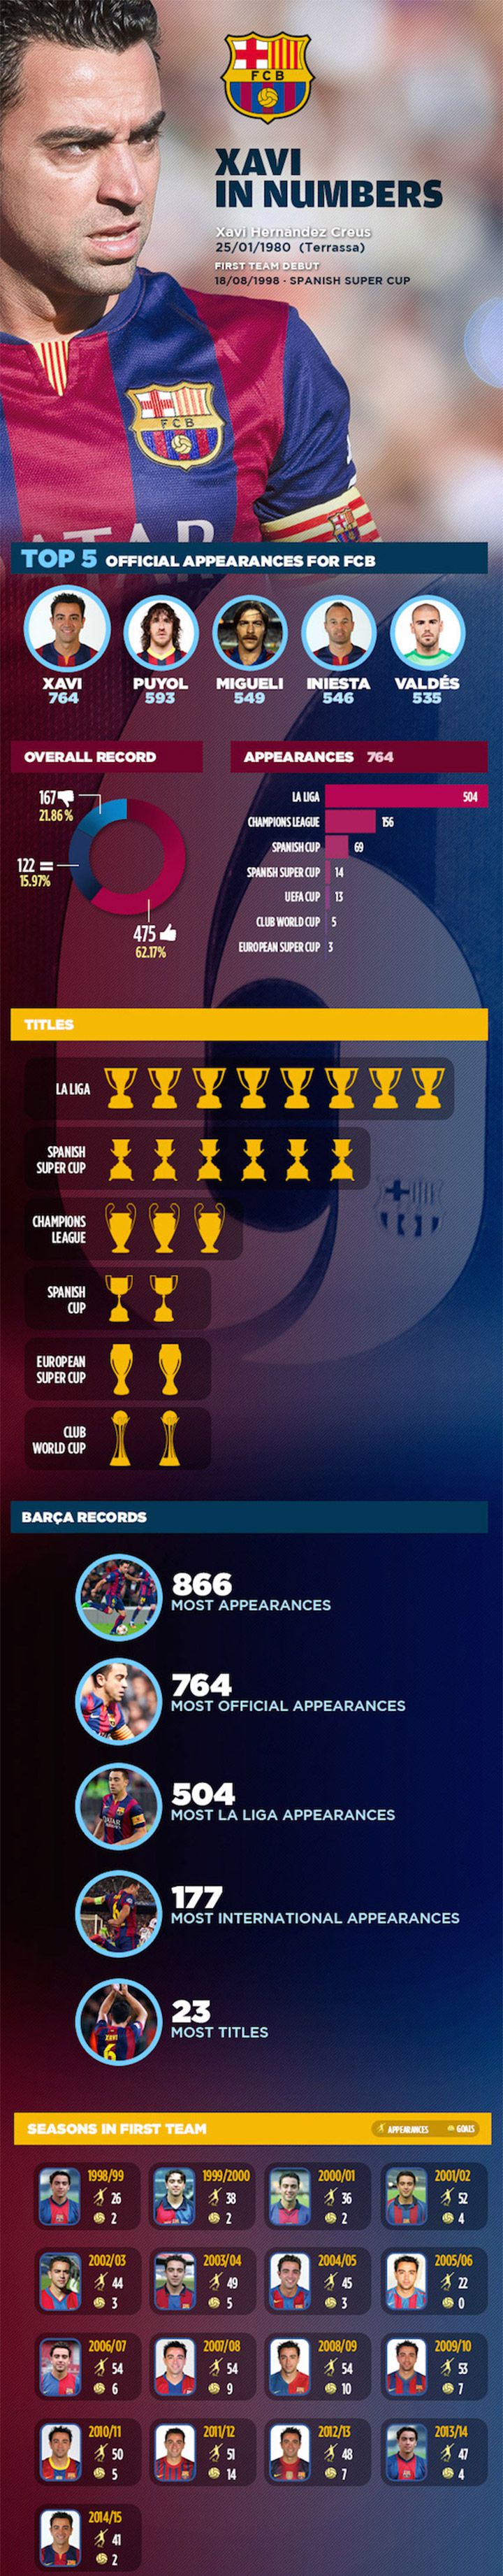 infographie carriere xavi fc barcelone